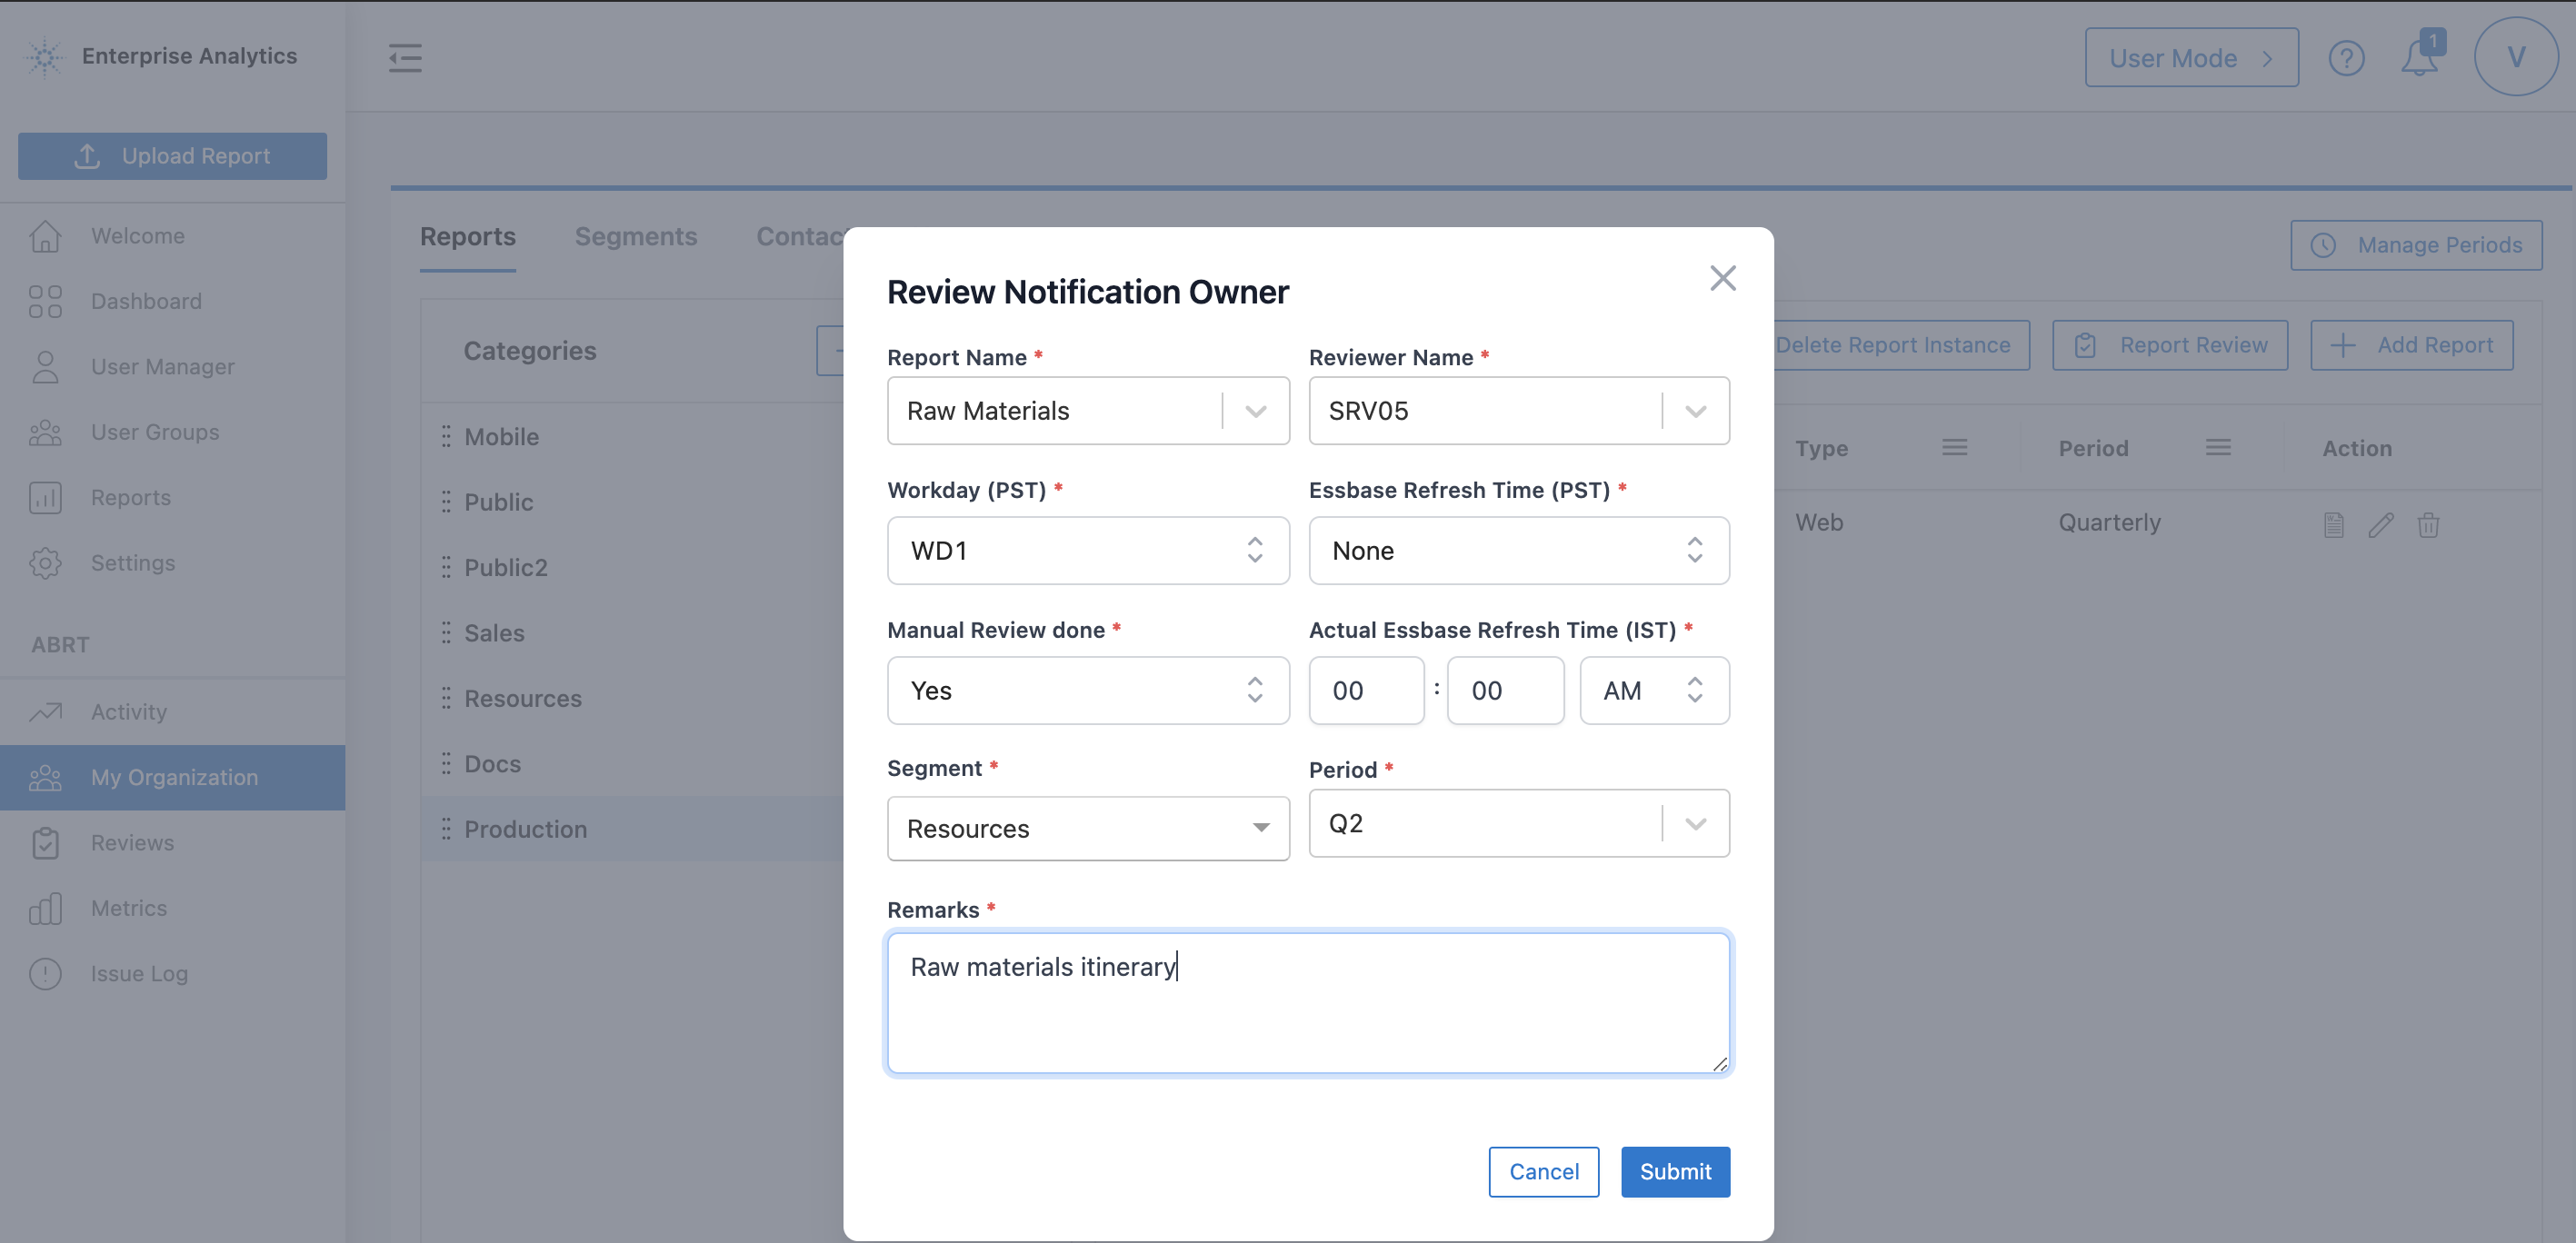 Review Notification Owner form